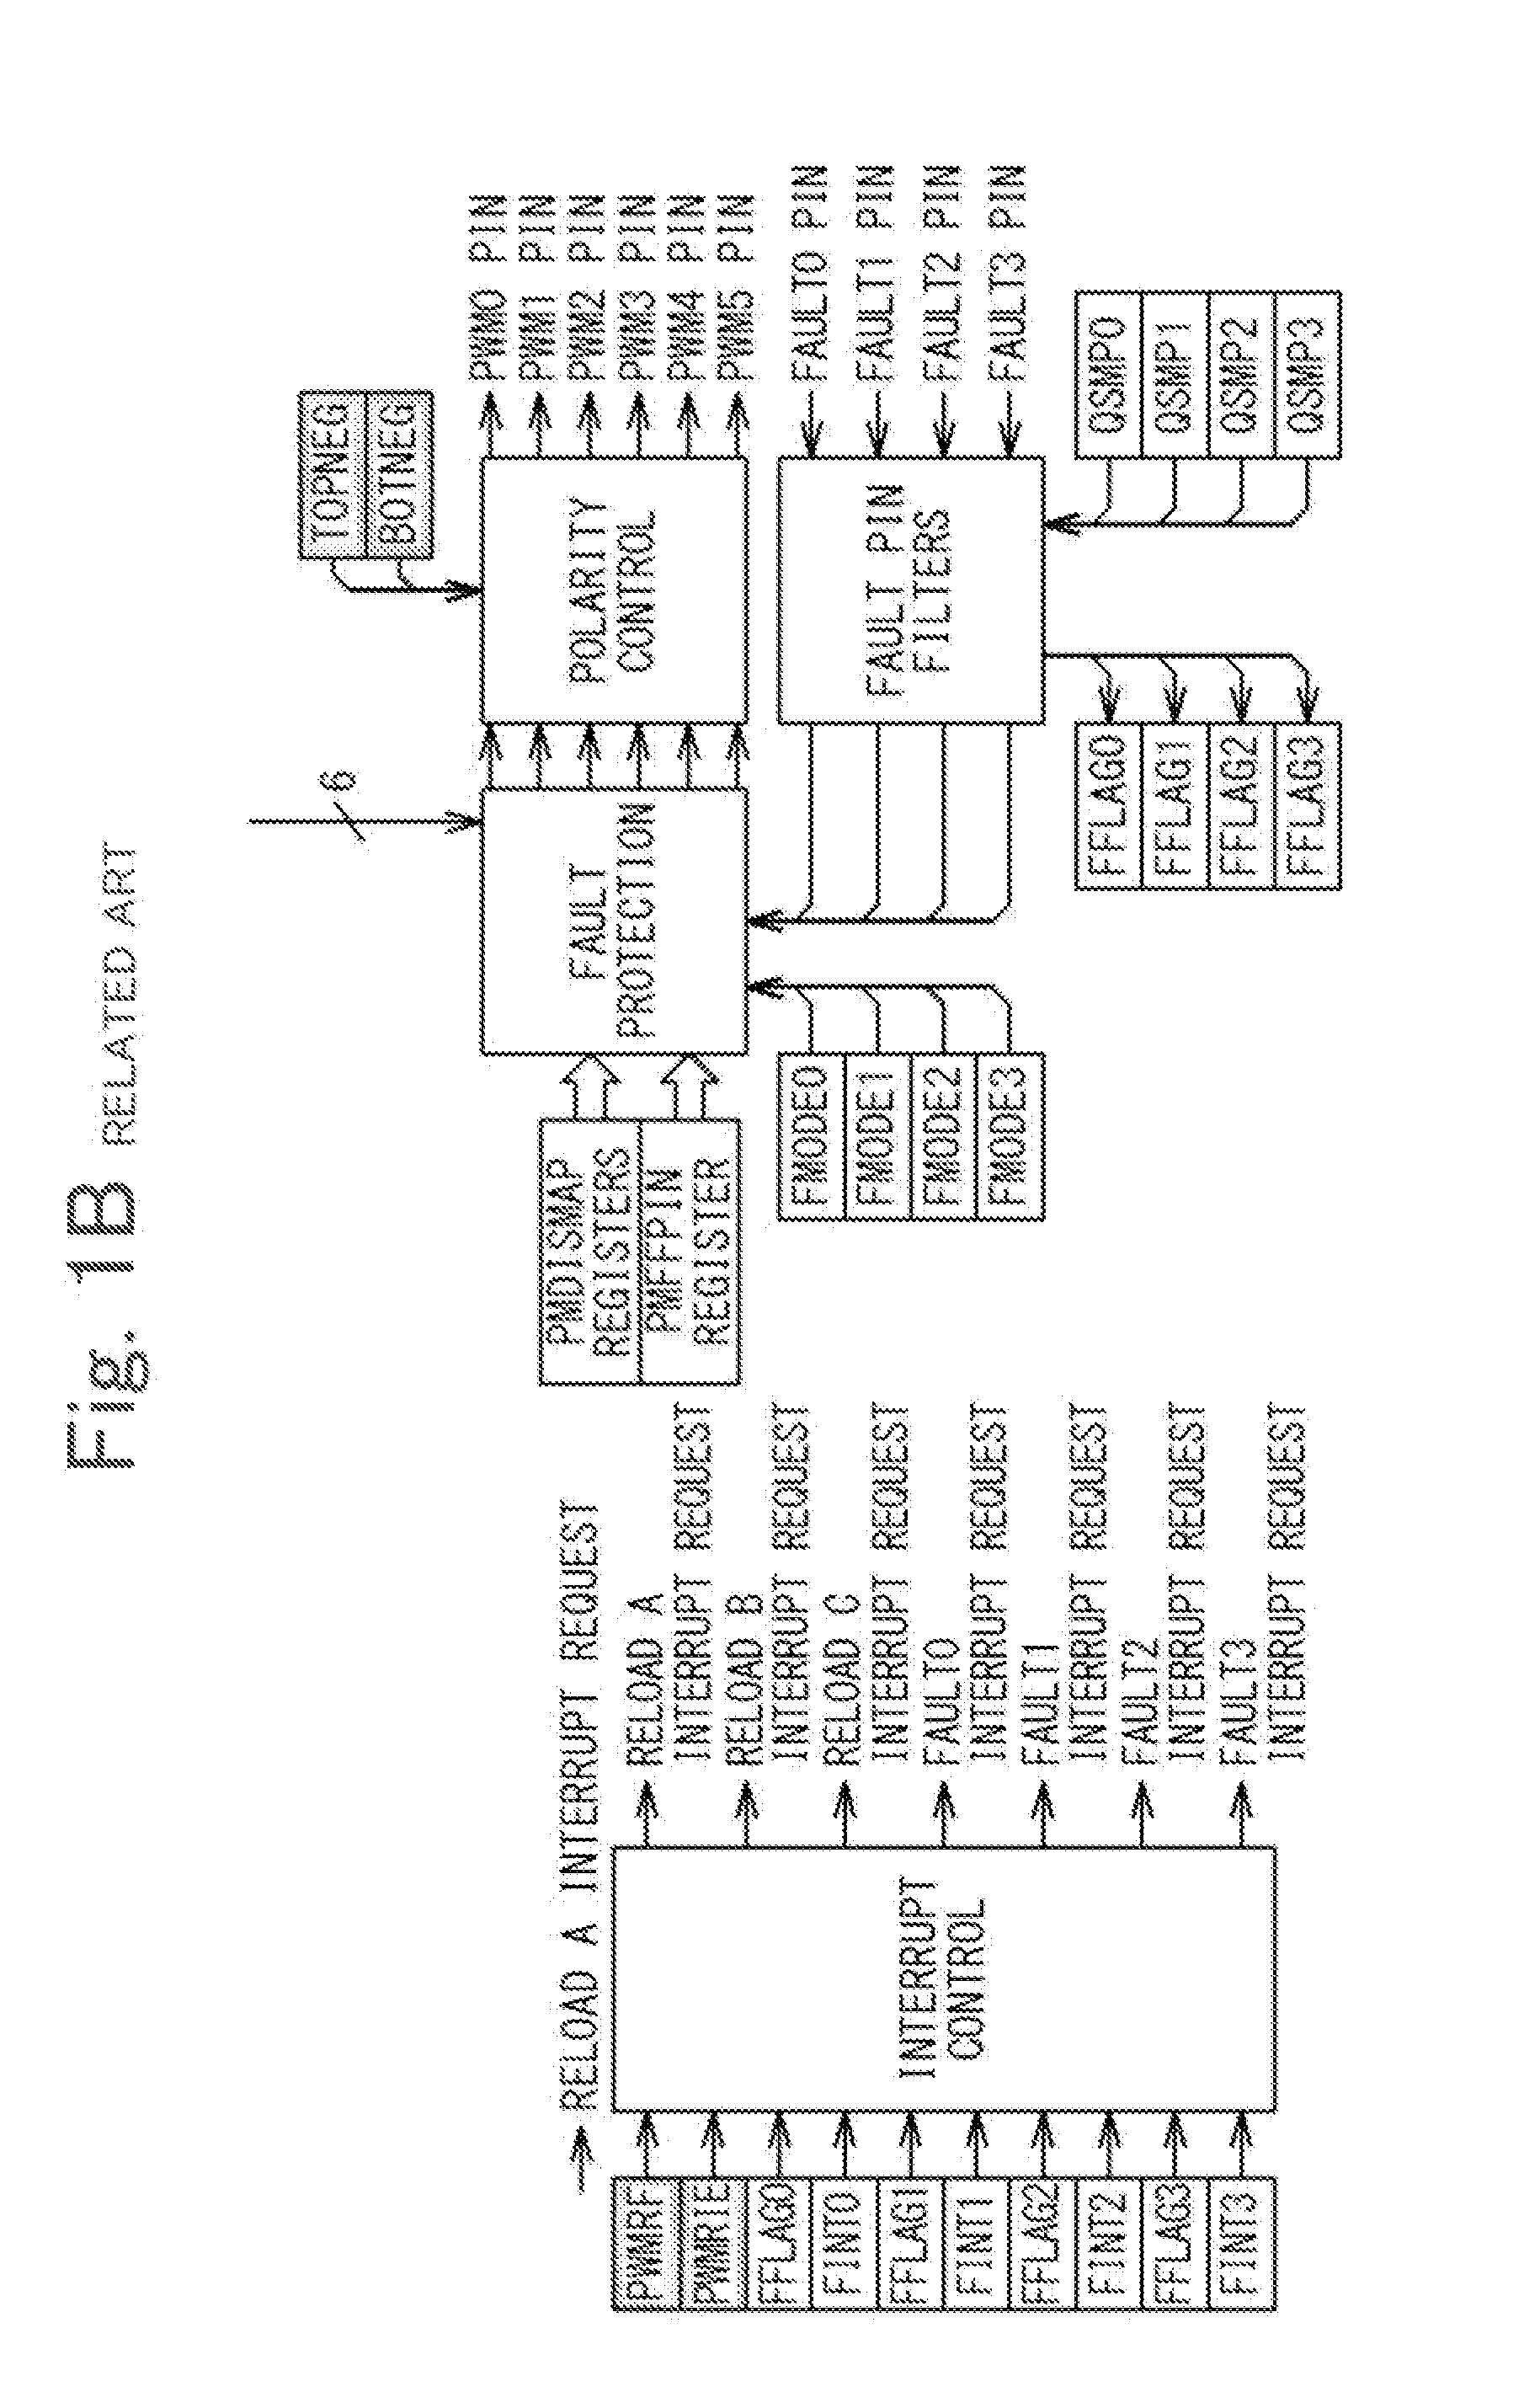 Pwm output apparatus and motor driving apparatus